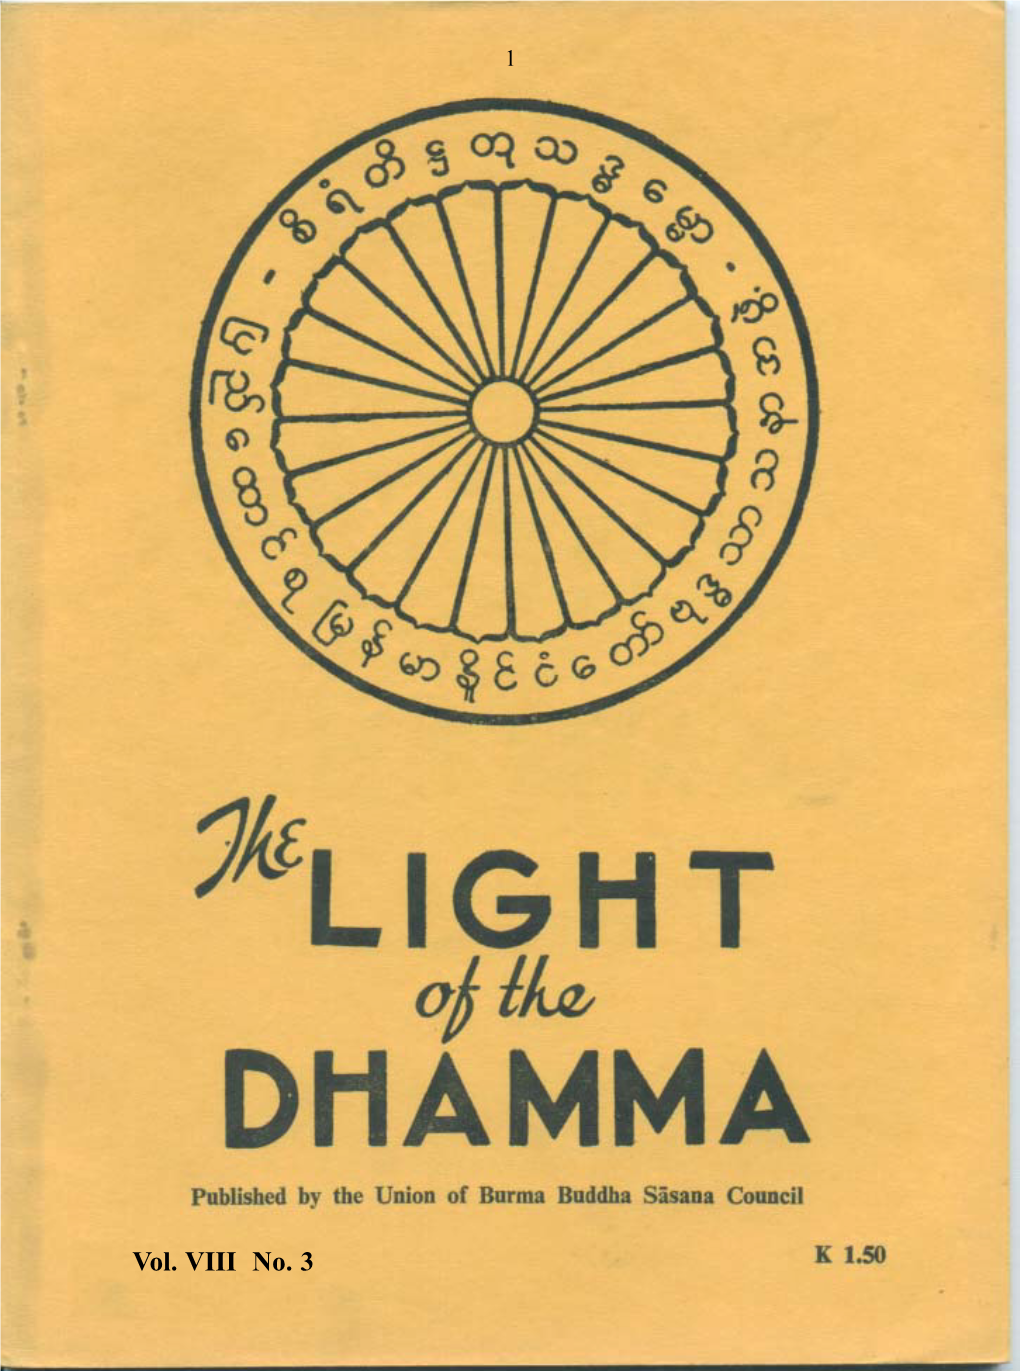 The Light of the Dhamma Vol VII Issue 3, July, 1961